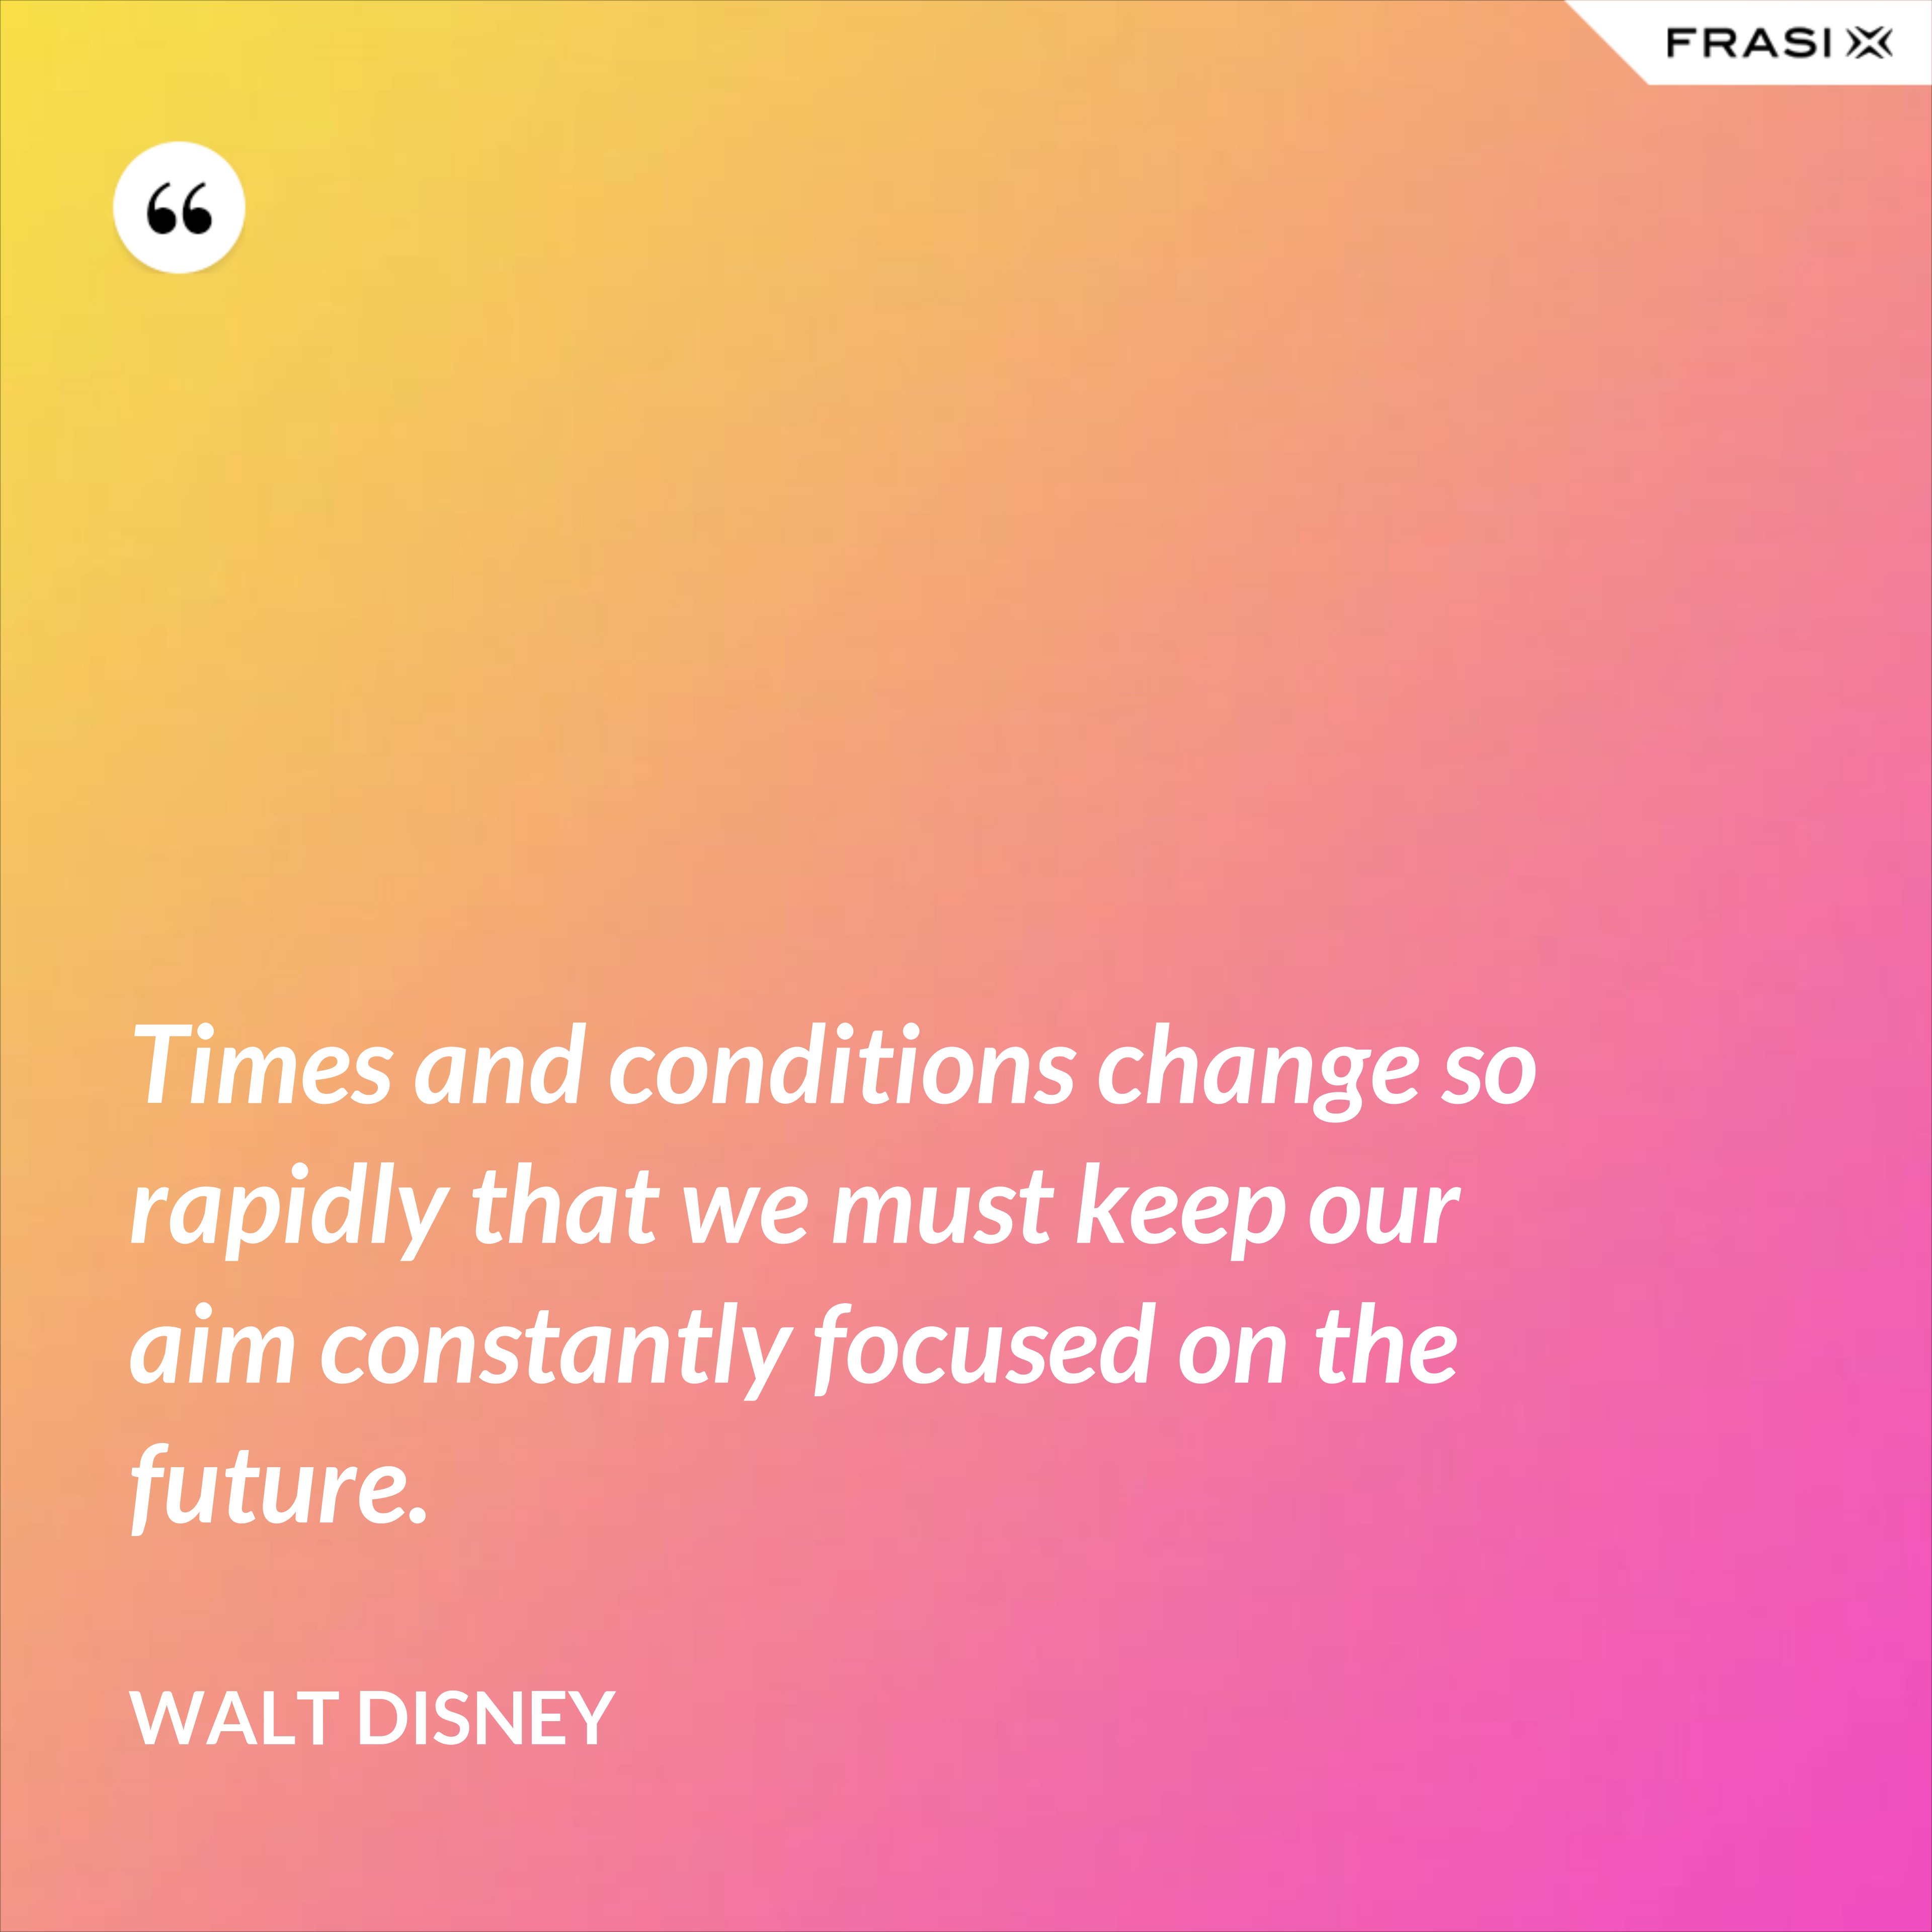 Times and conditions change so rapidly that we must keep our aim constantly focused on the future. - Walt Disney